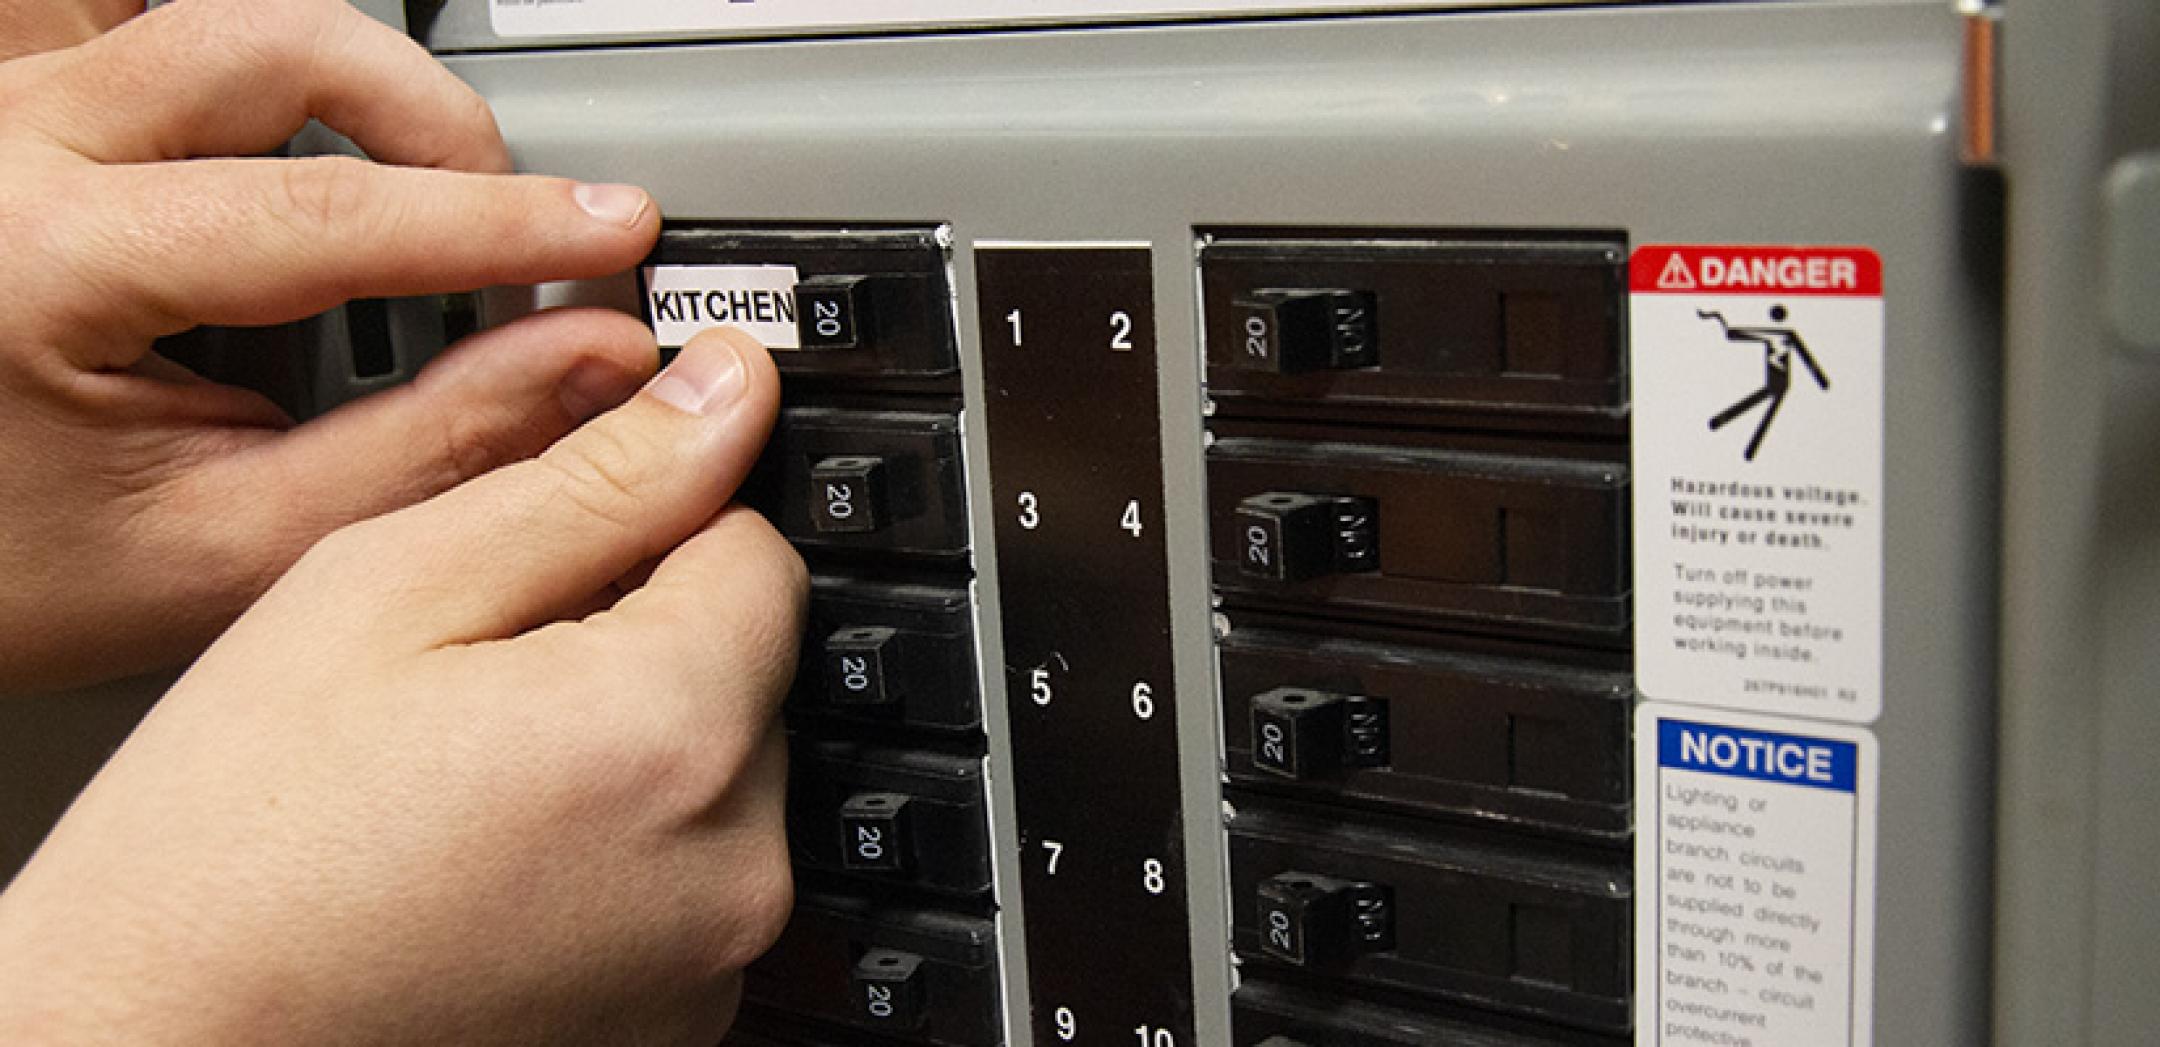 Get Organized and Label Your Electrical Panel